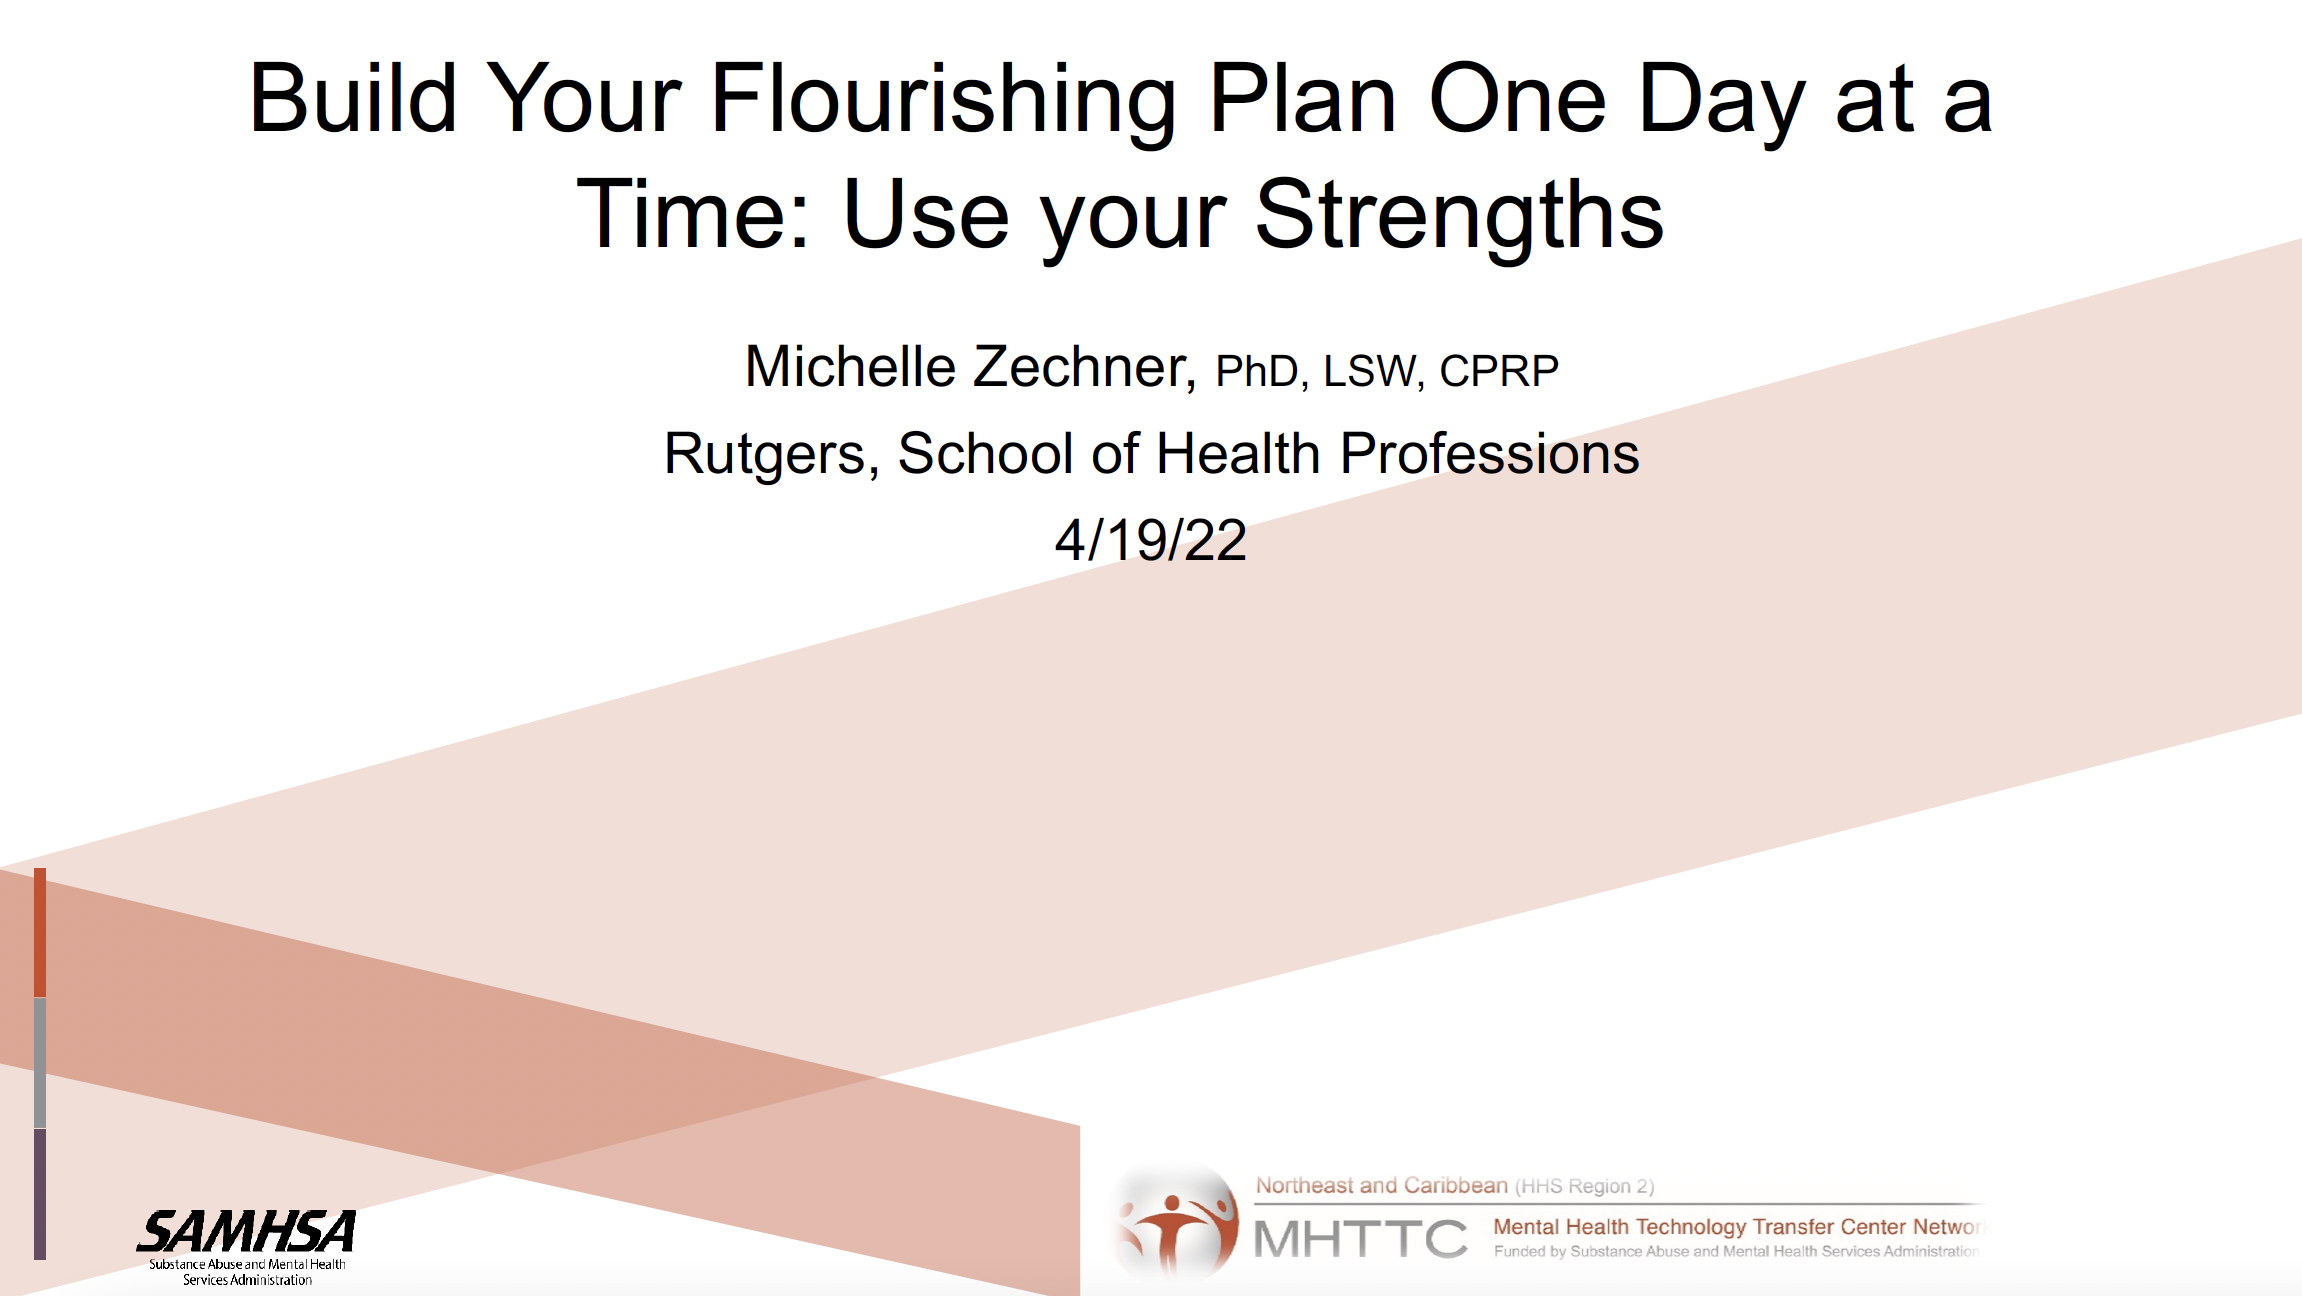 Introduction slide for Build Your Flourishing Plan One Day at a Time: Use Your Strengths